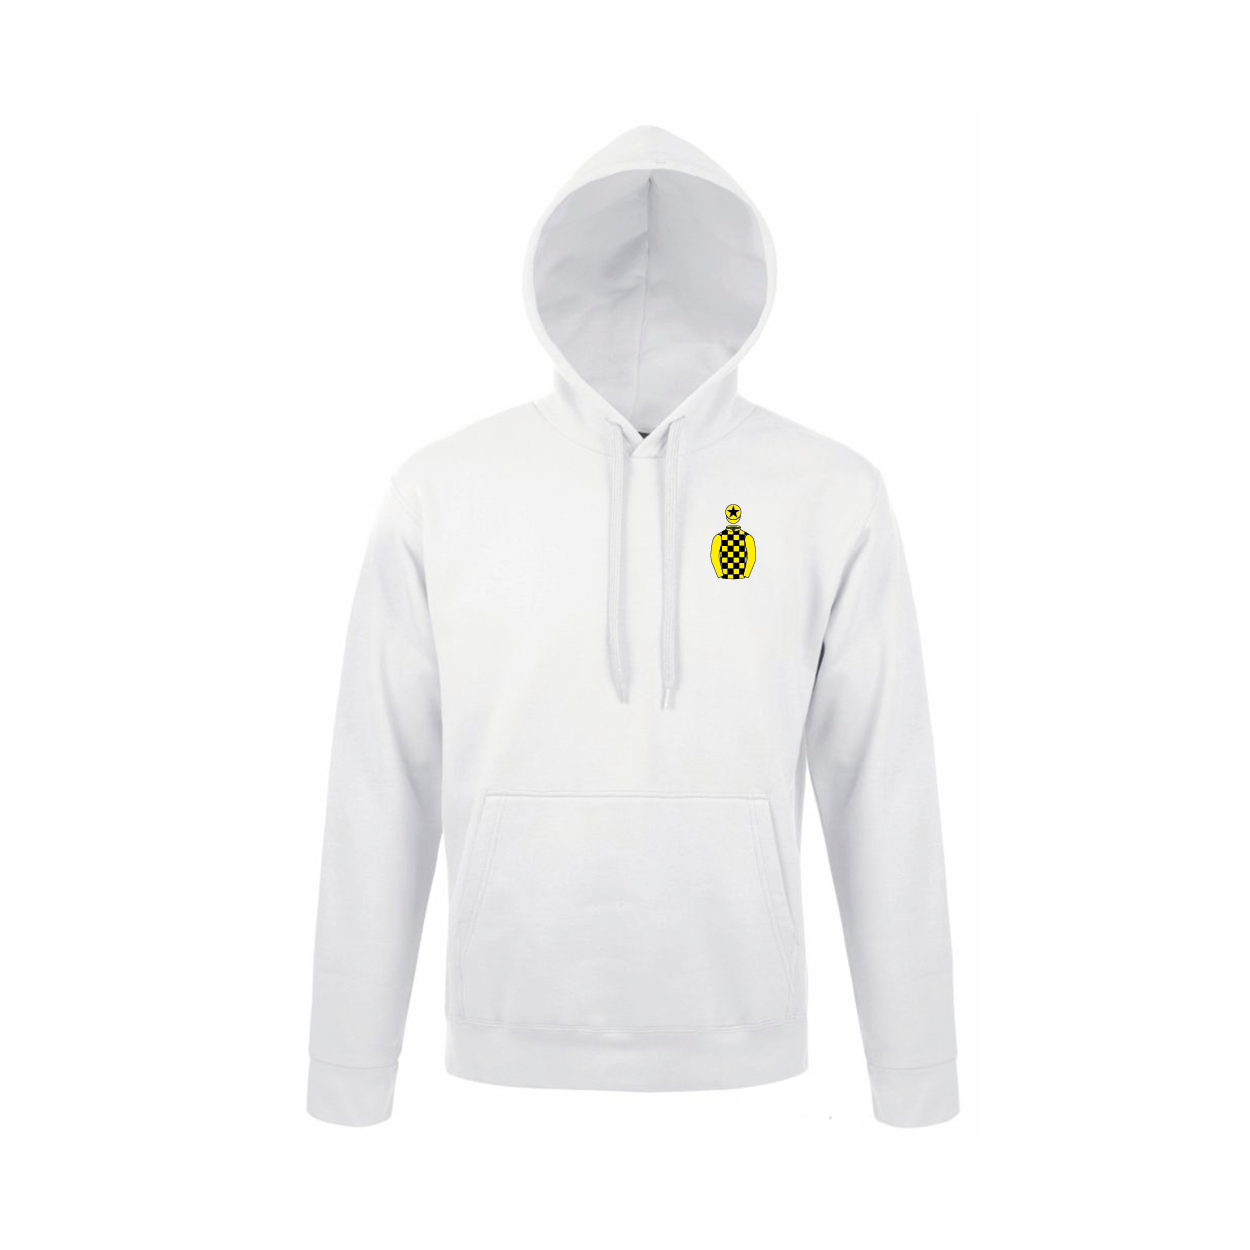 Unisex Mrs J Donnelly Embroidered Hooded Sweatshirt - Clothing - Hacked Up